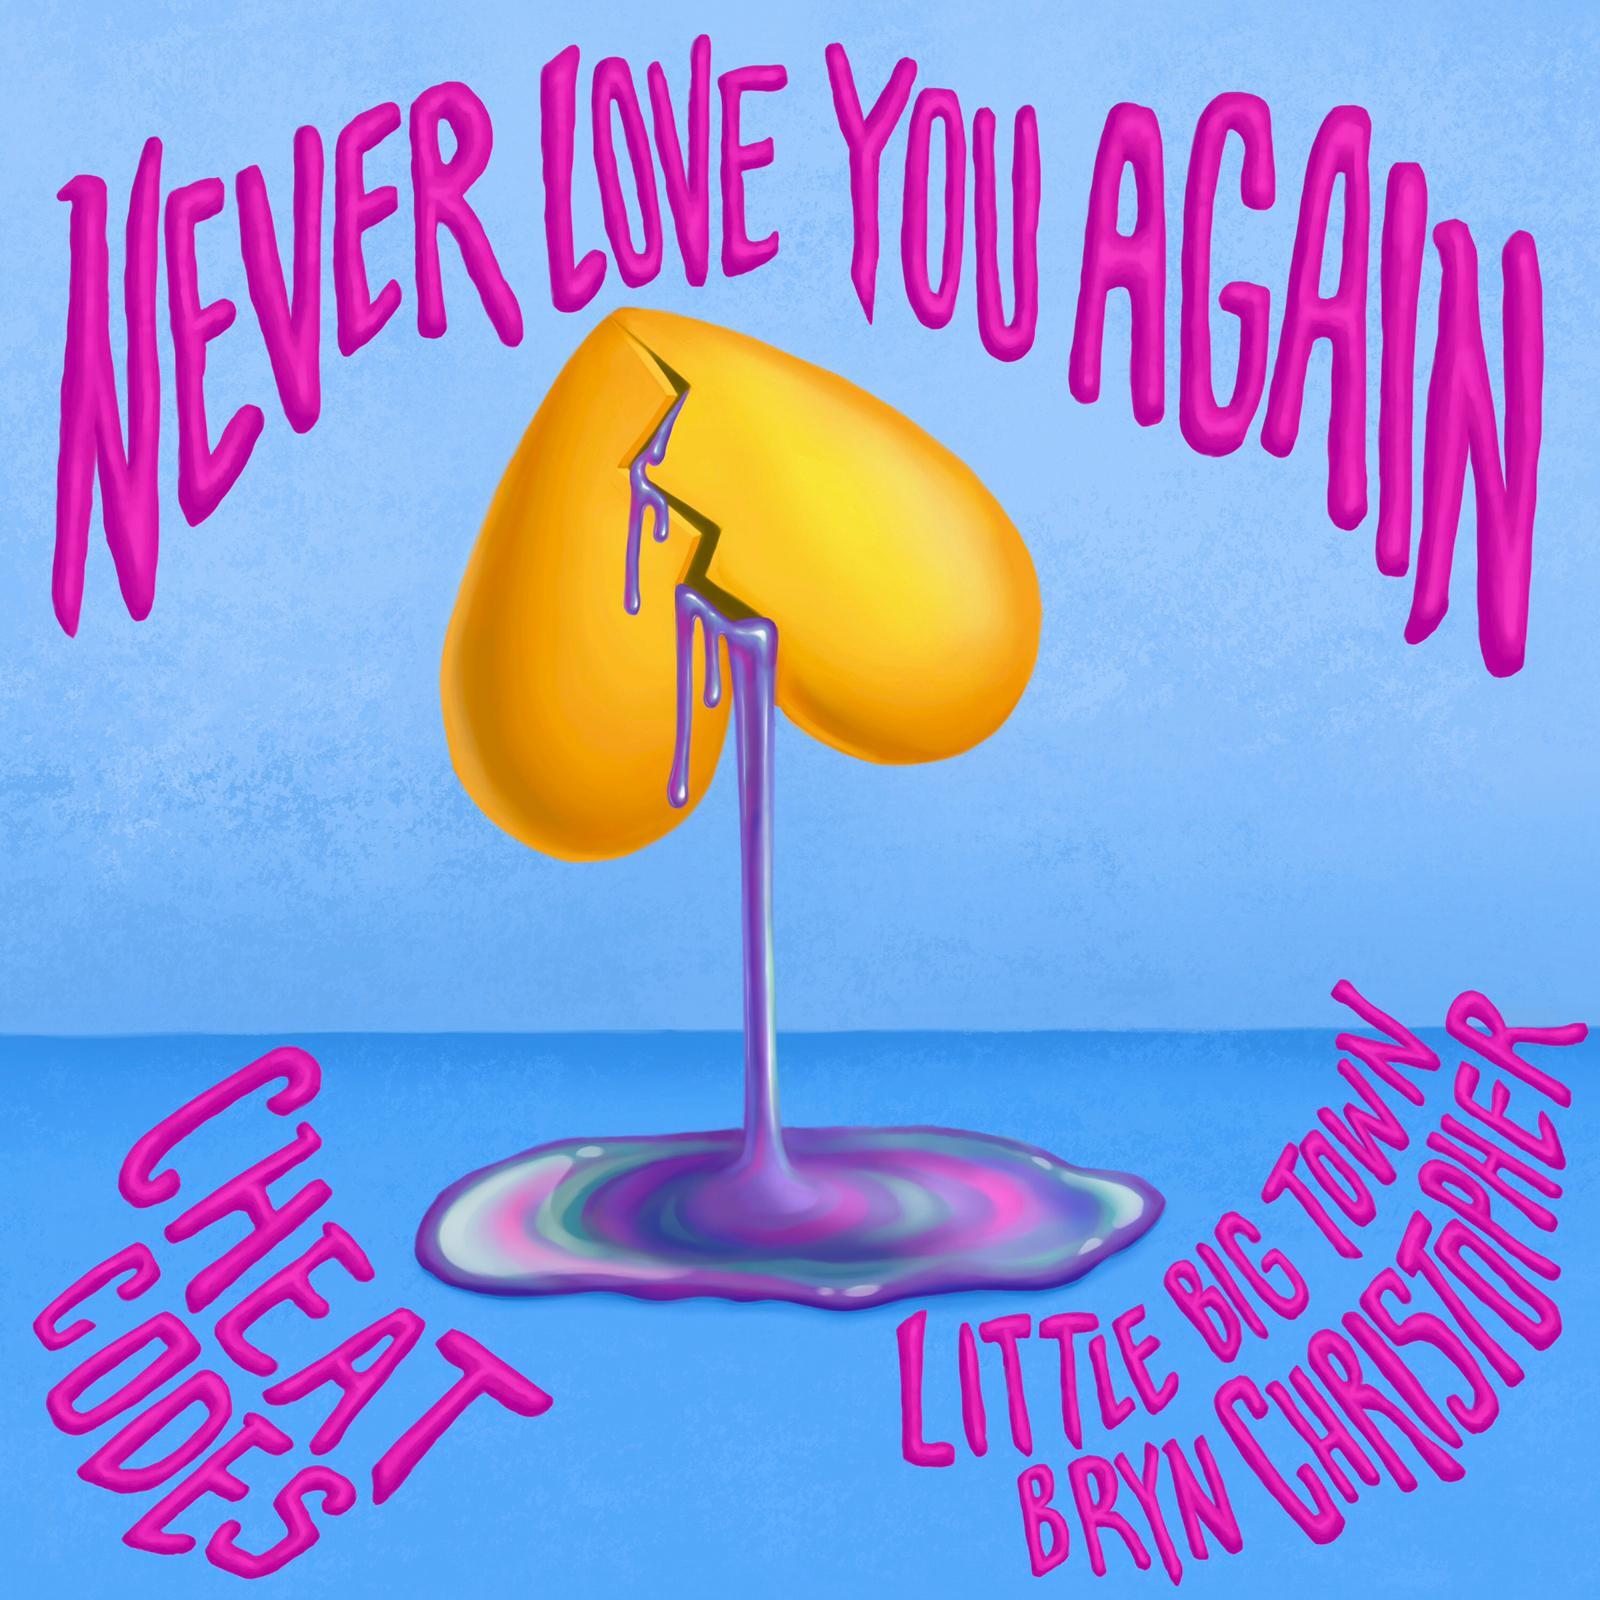 CHEAT CODES AND LITTLE BIG TOWN COLLABORATE ON “NEVER LOVE YOU AGAIN” FEATURING BRYN CHRISTOPHER